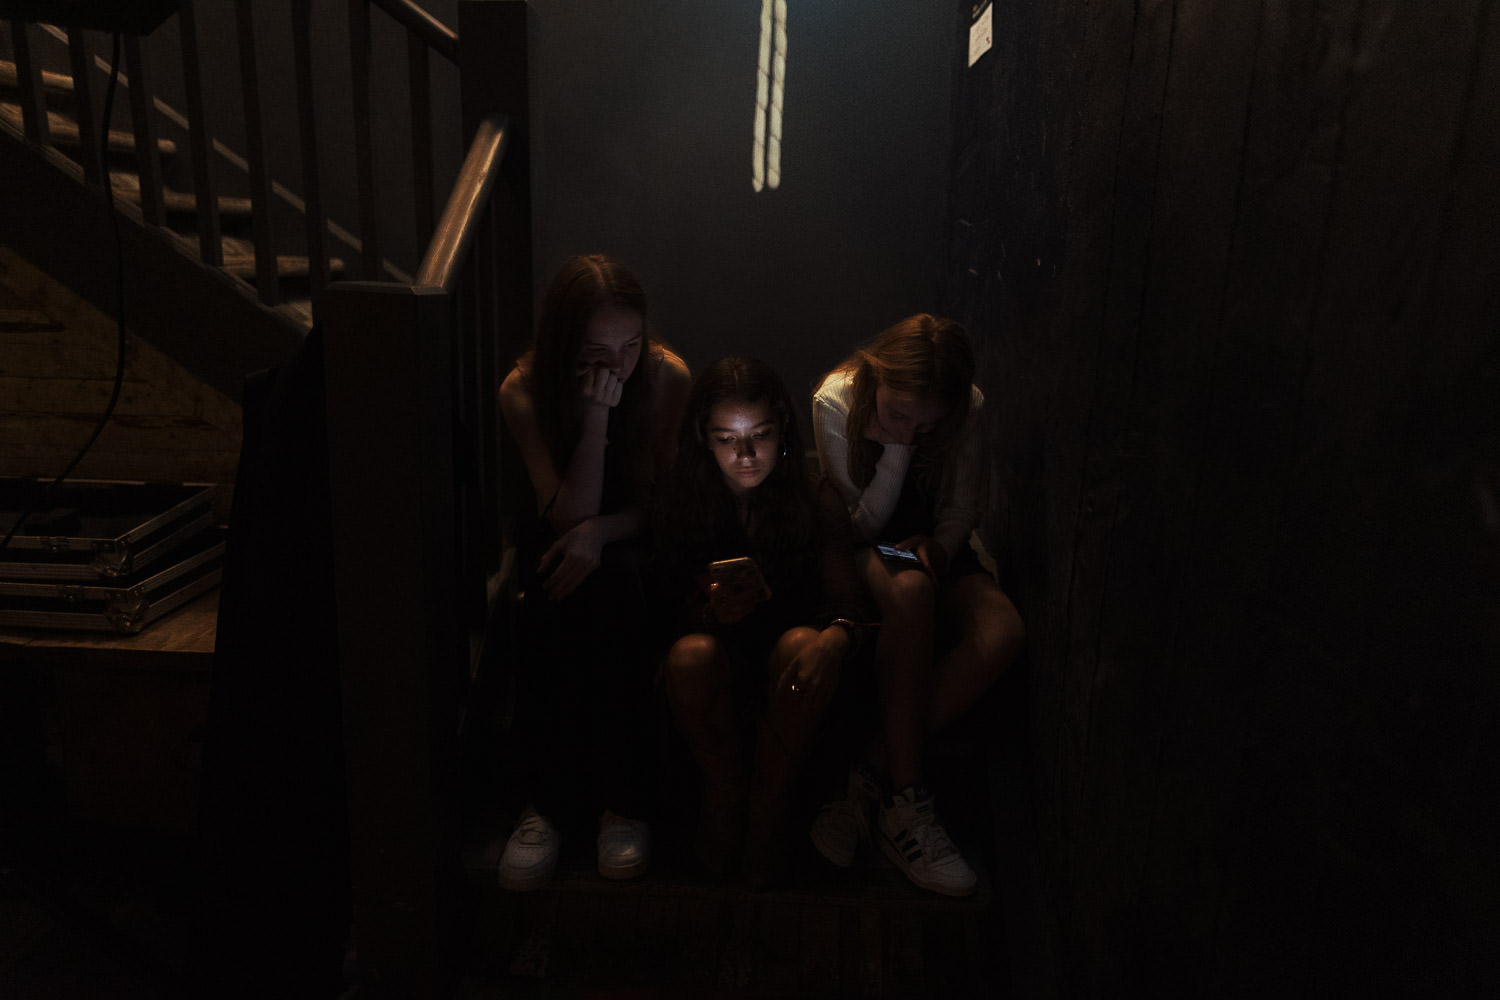 Three young women seated on the stairs at Never For Ever at wedding reception, absorbed in their smartphones. The image complements text emphasising that, owing to the photographer's reportage style, clients won't be disturbed on their wedding day for social media content videos.